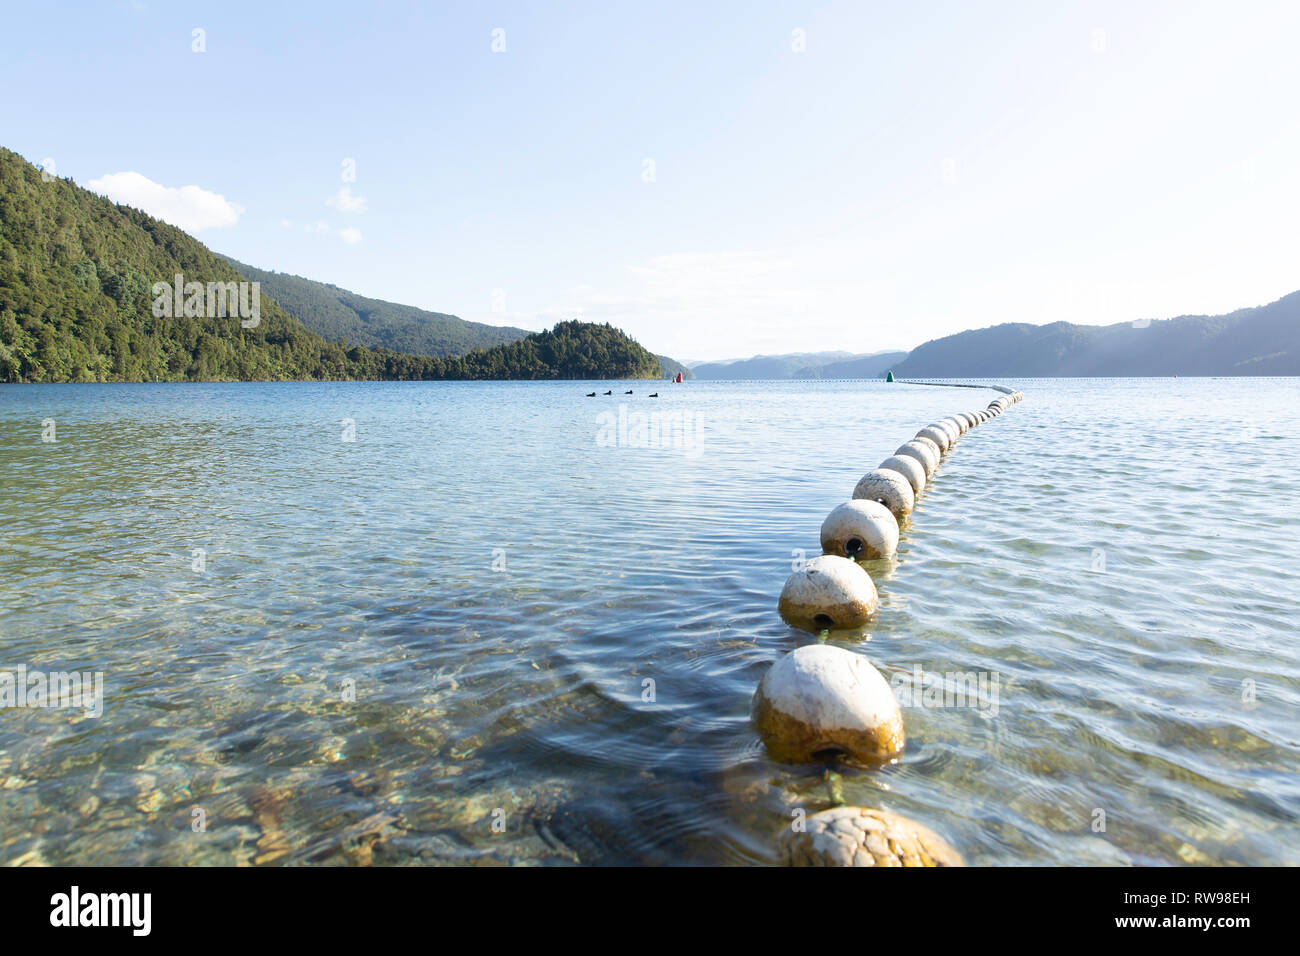 View of Lake Okataina and a line of buoys during sunset in New Zealand. Stock Photo